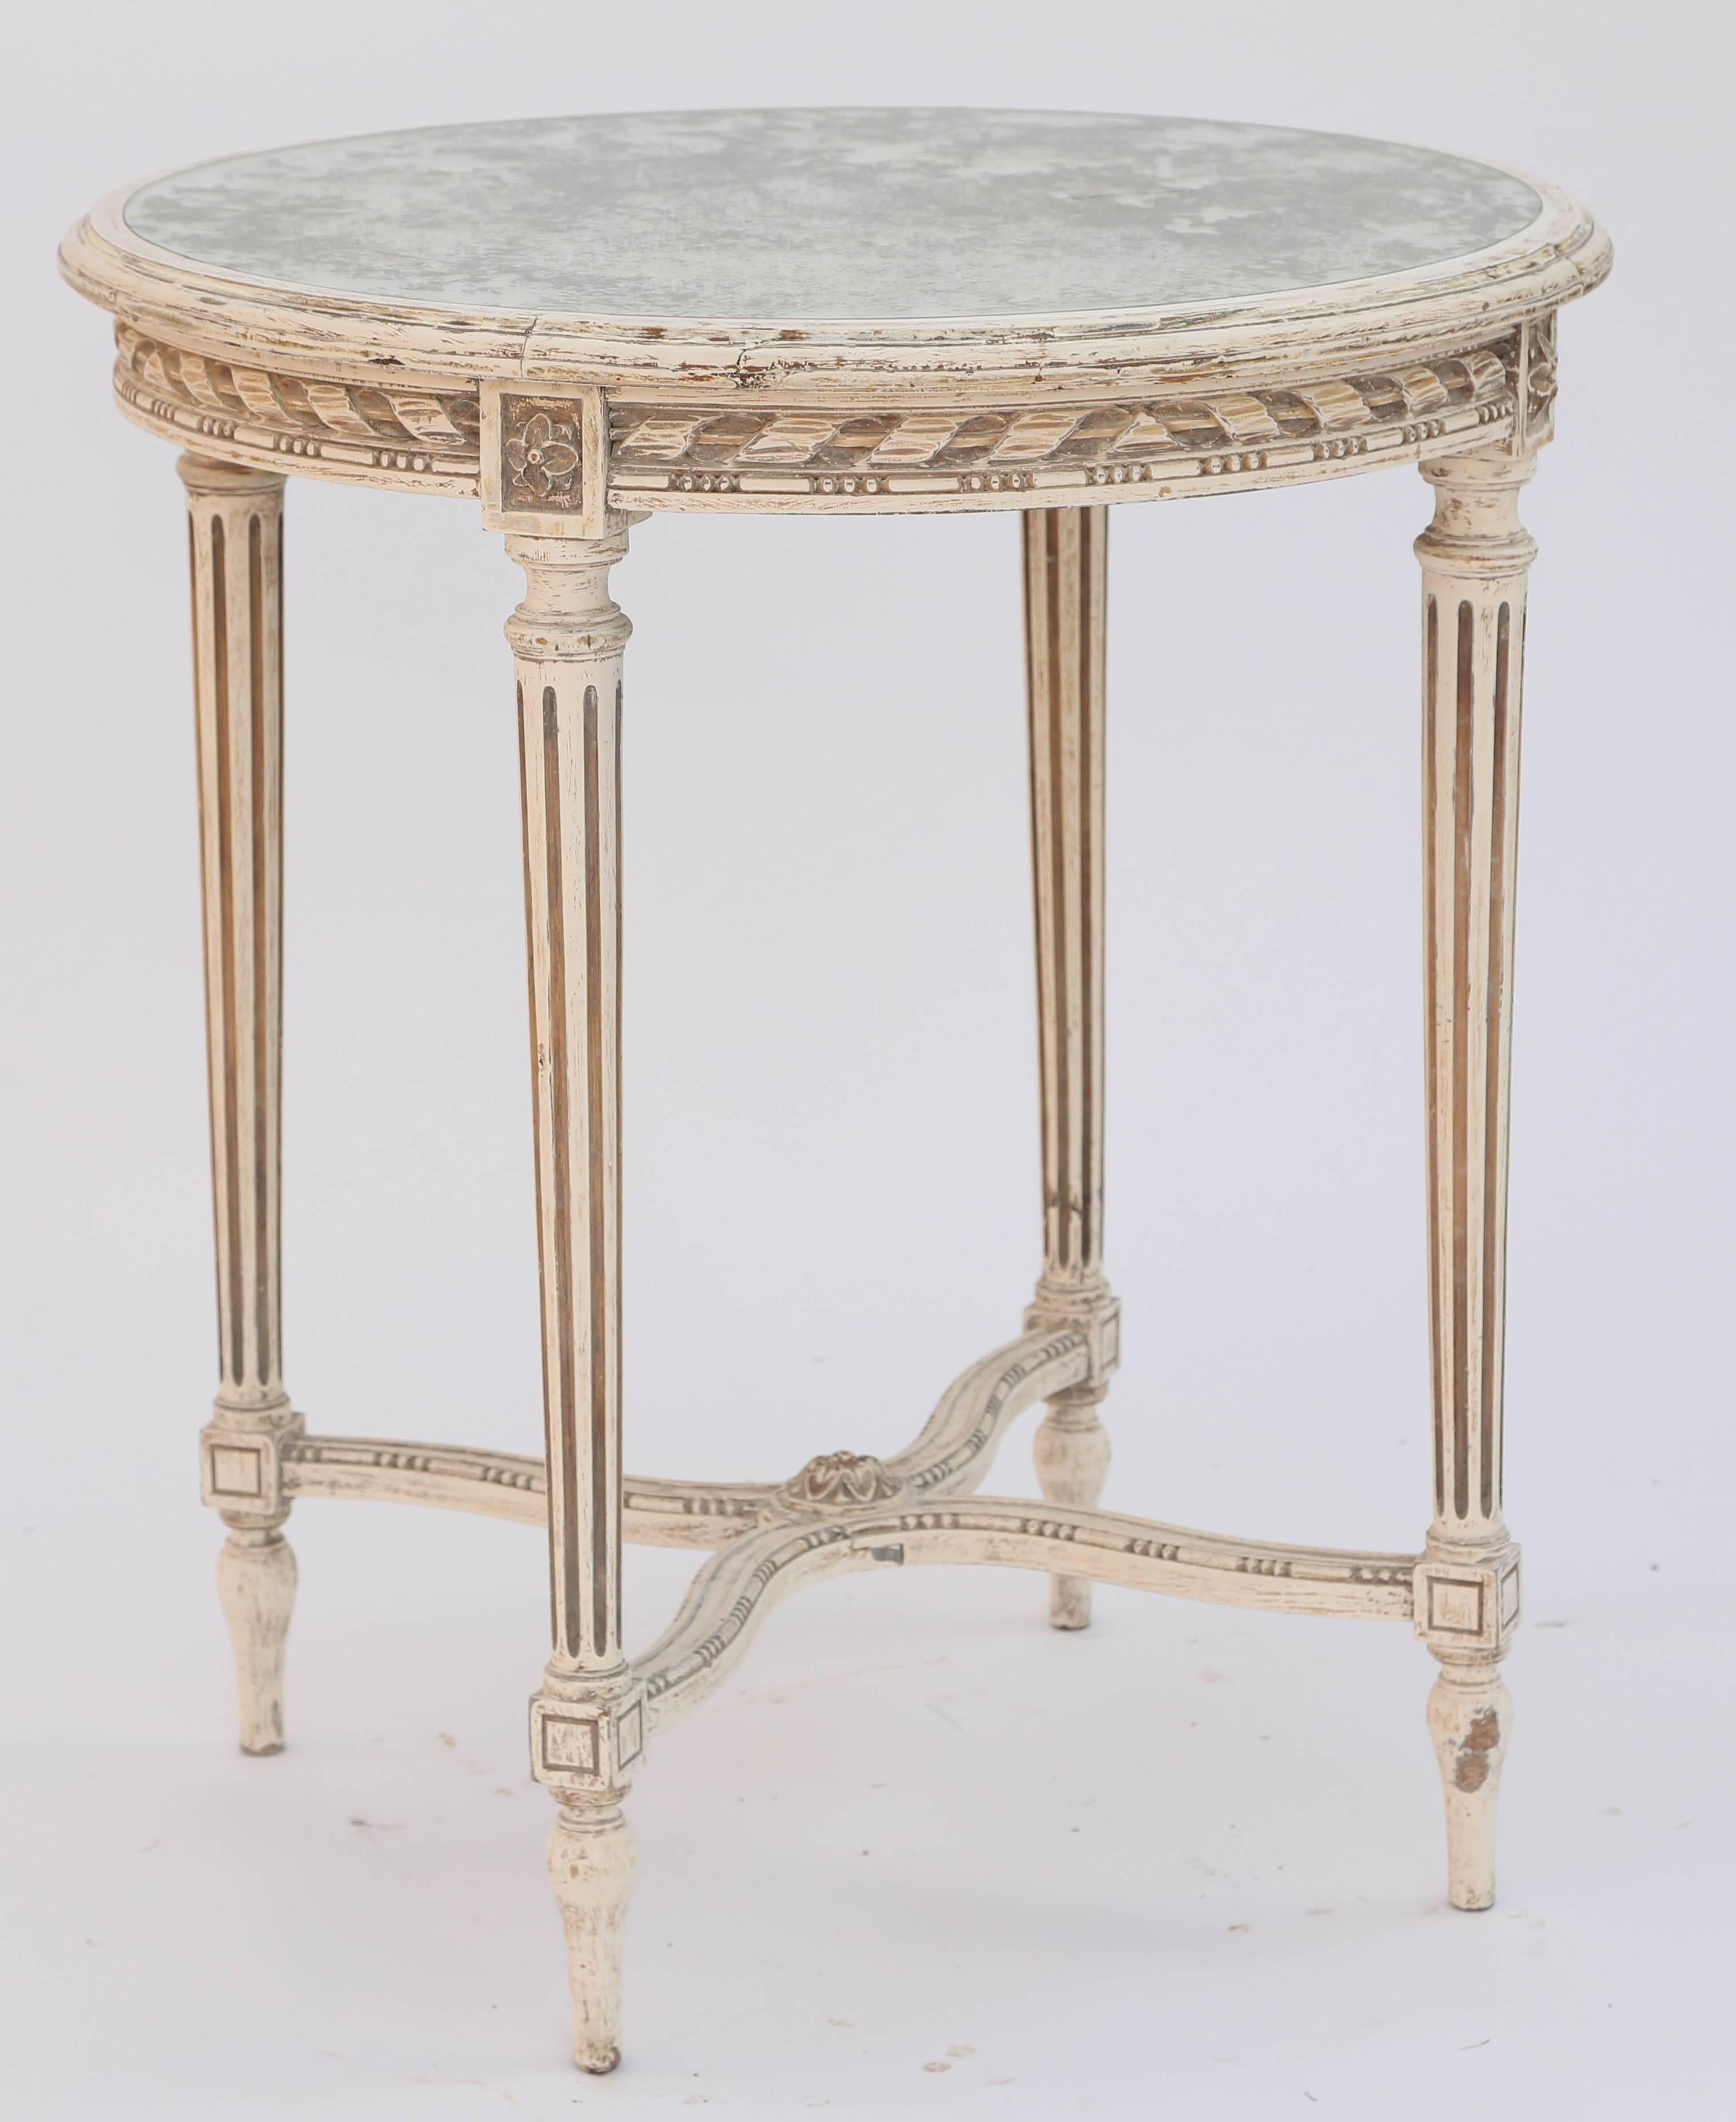 Side table, with a painted finish showing natural wear, having a round top of spotted mirror, in molded frame, its apron carved with ribbons and rods, separated by flowerhead blocks, raised on four round, tapering, fluted legs, joined by an X-form